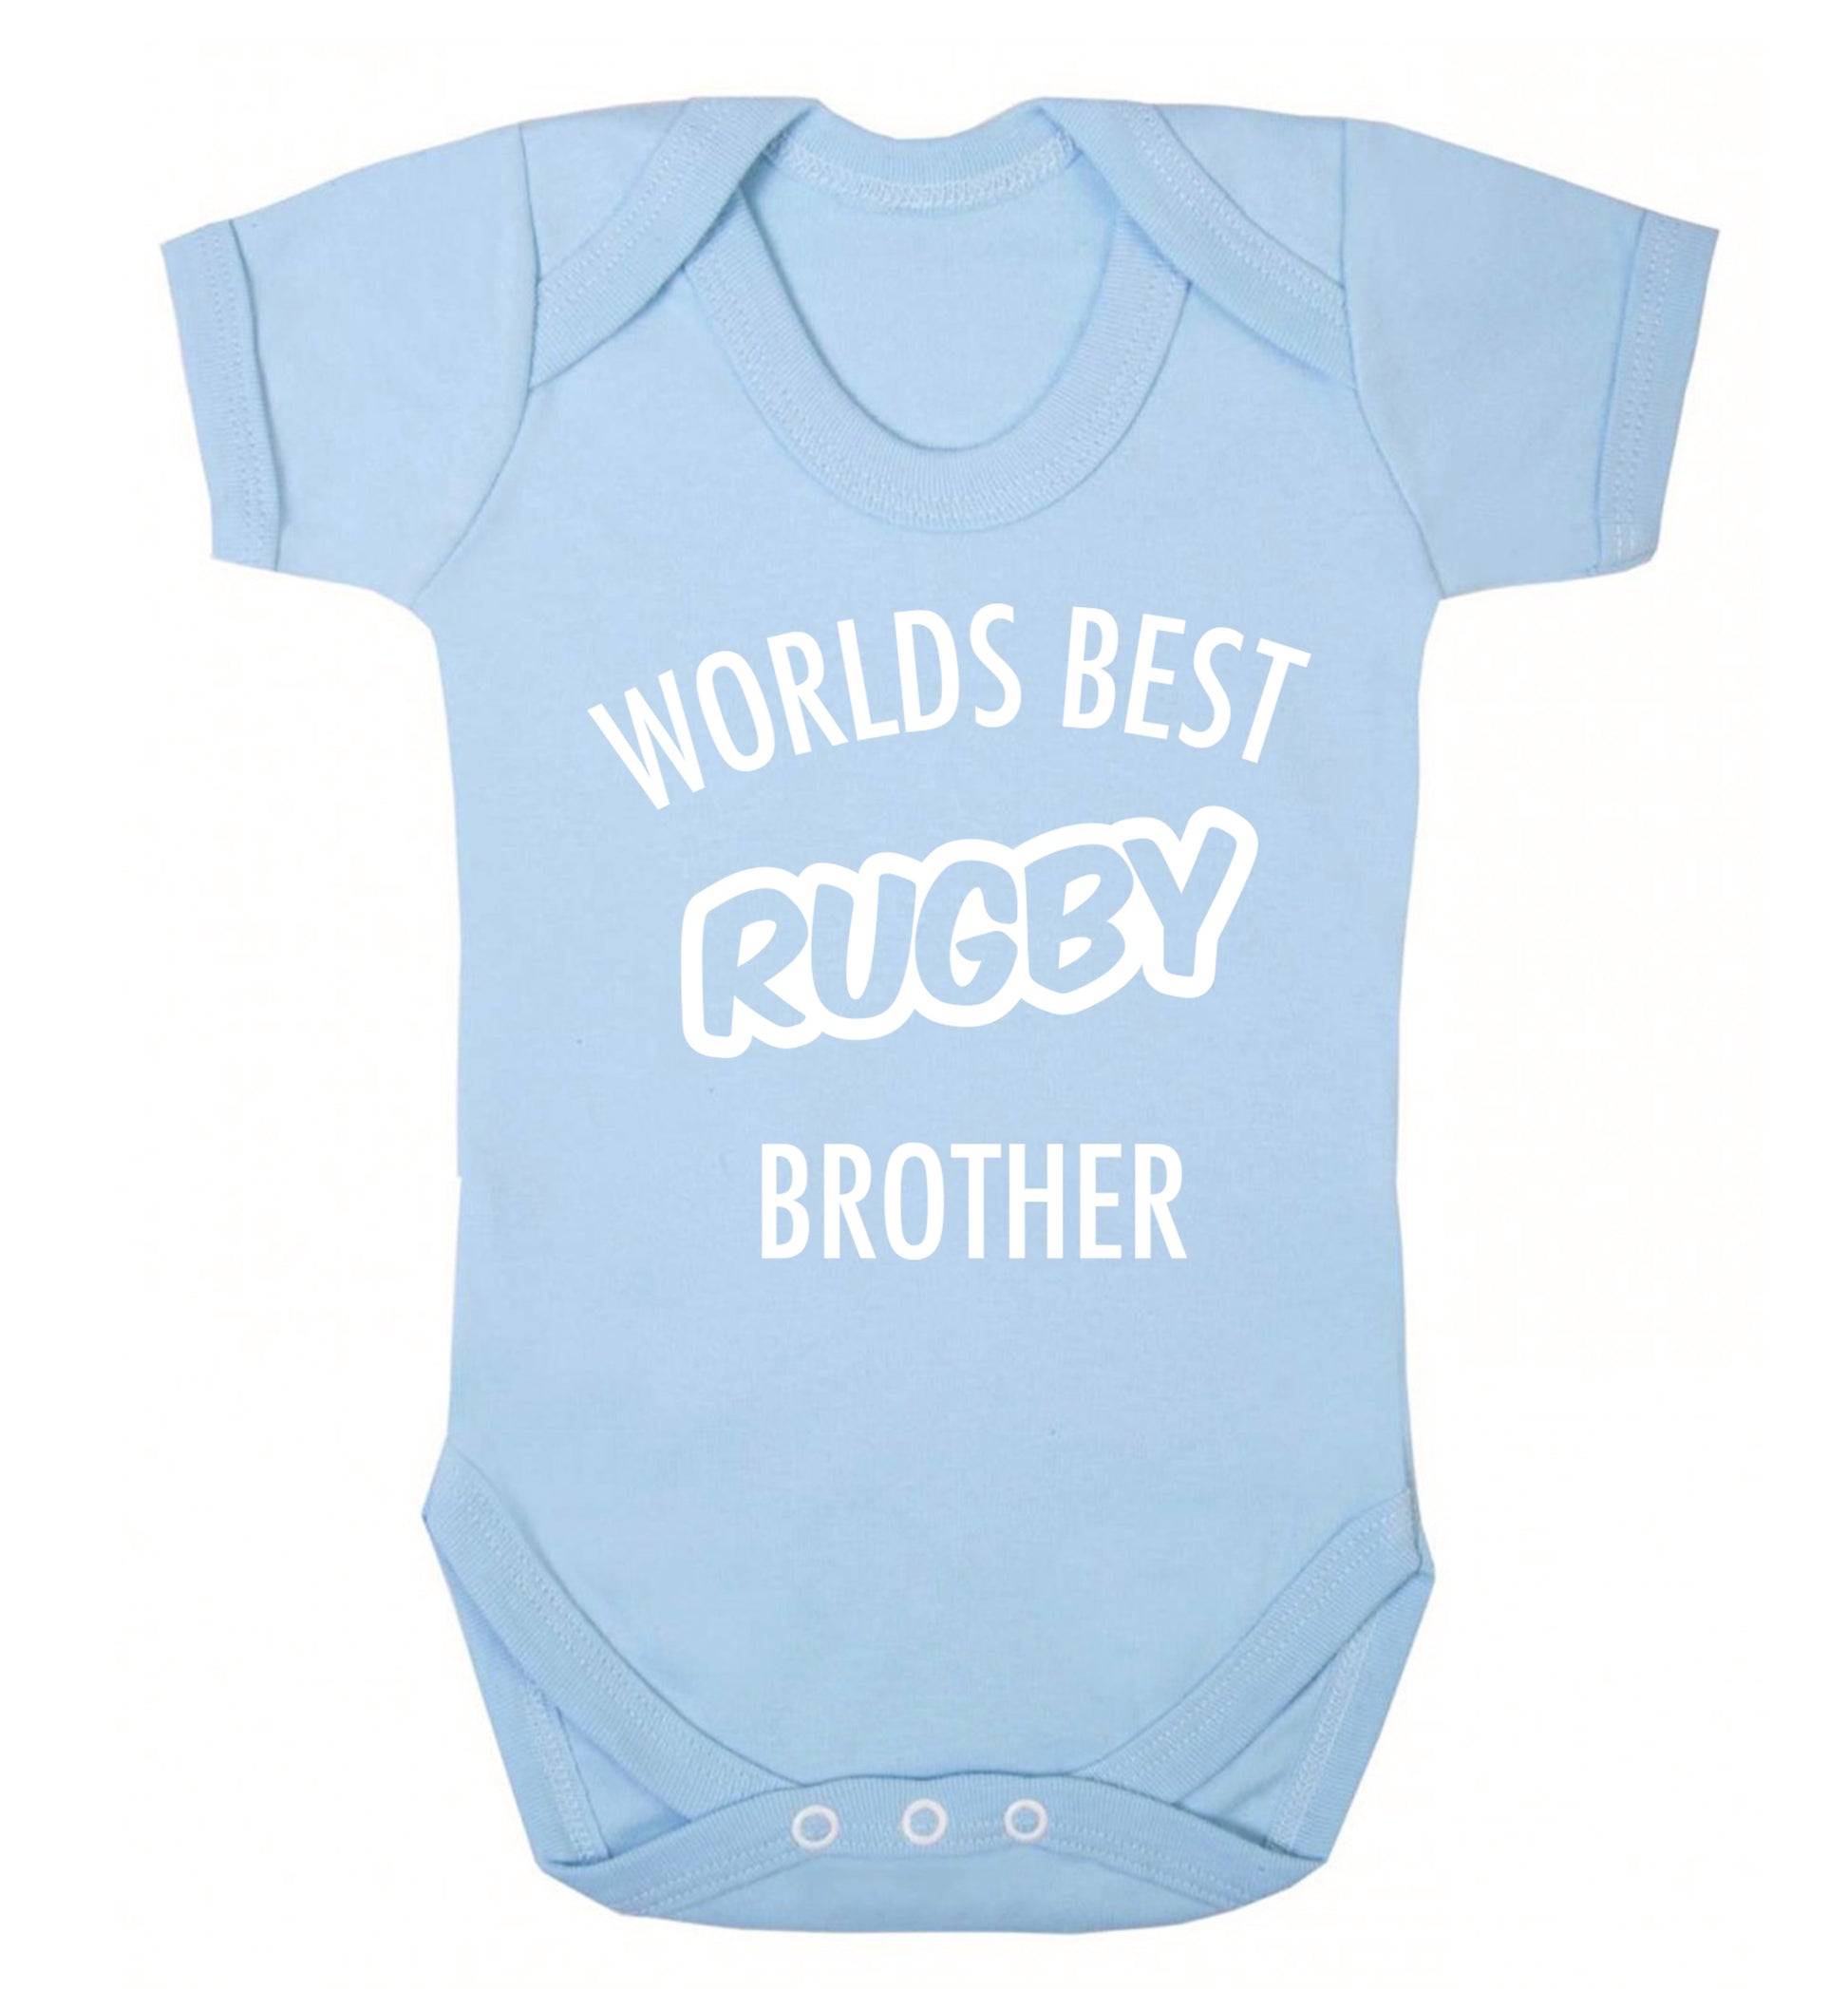 Worlds best rugby brother Baby Vest pale blue 18-24 months